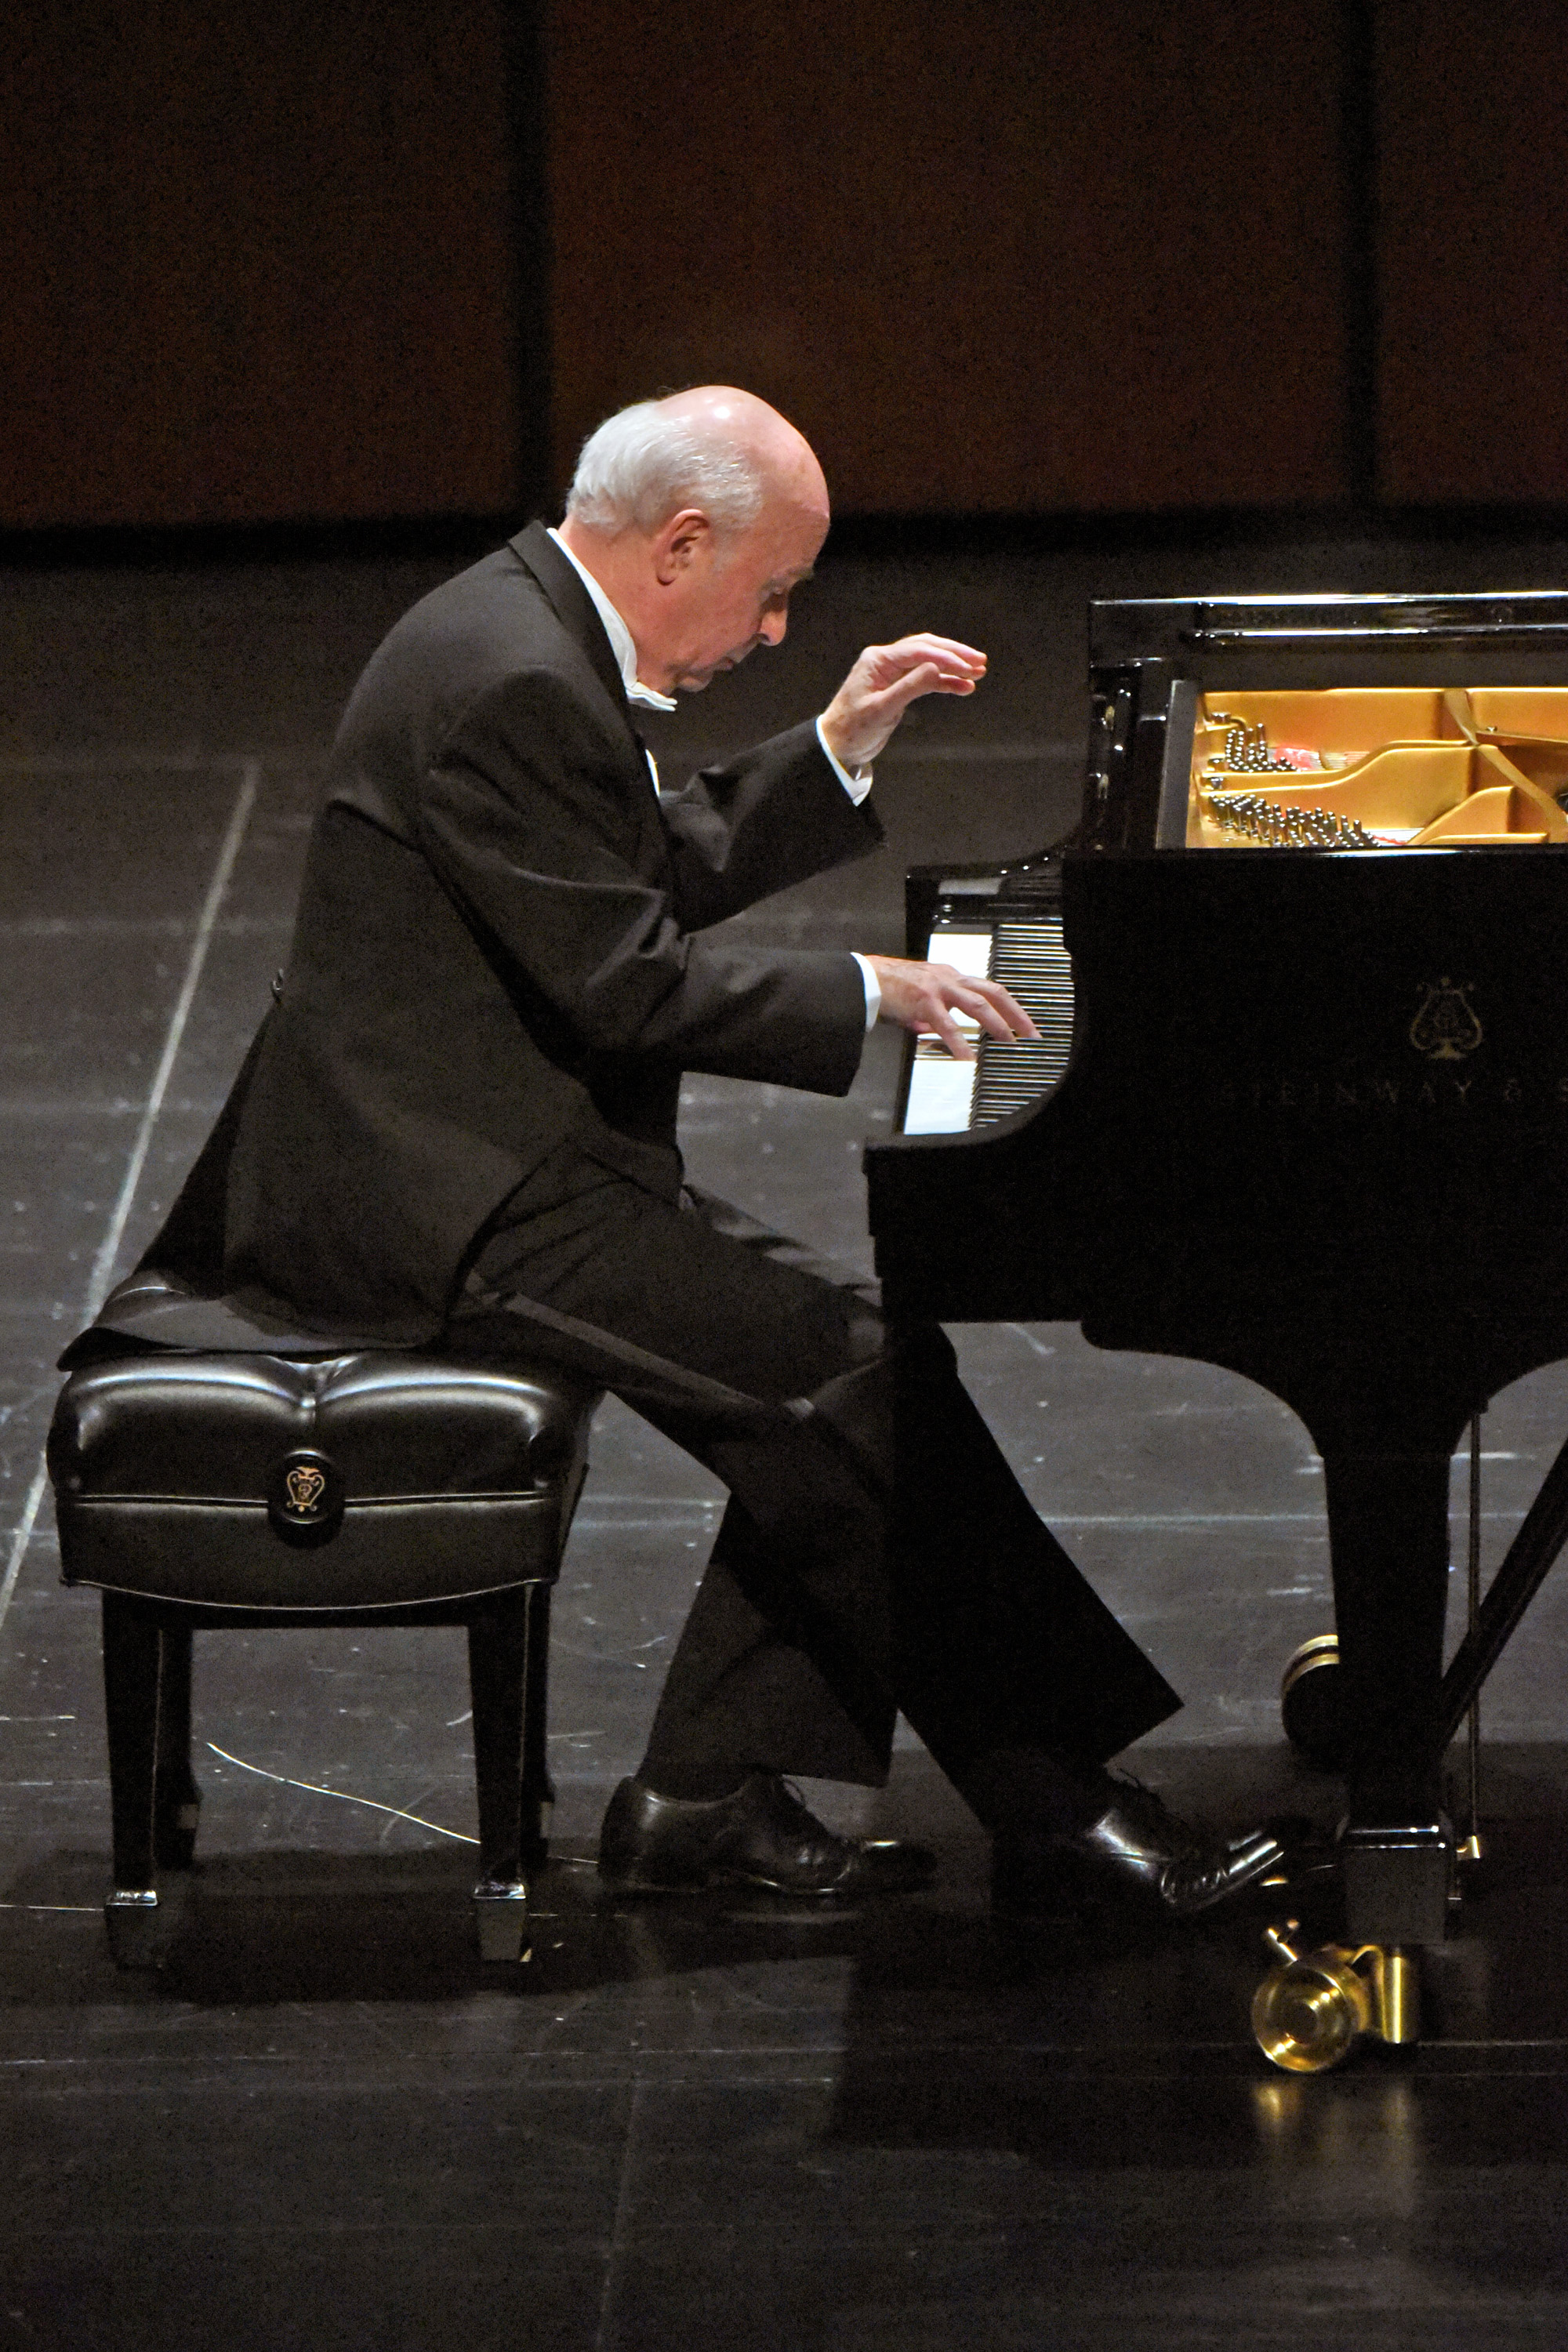 Pianist Jorge Federico Osorio performing in his Los Angeles recital debut on January 16, 2019, at th